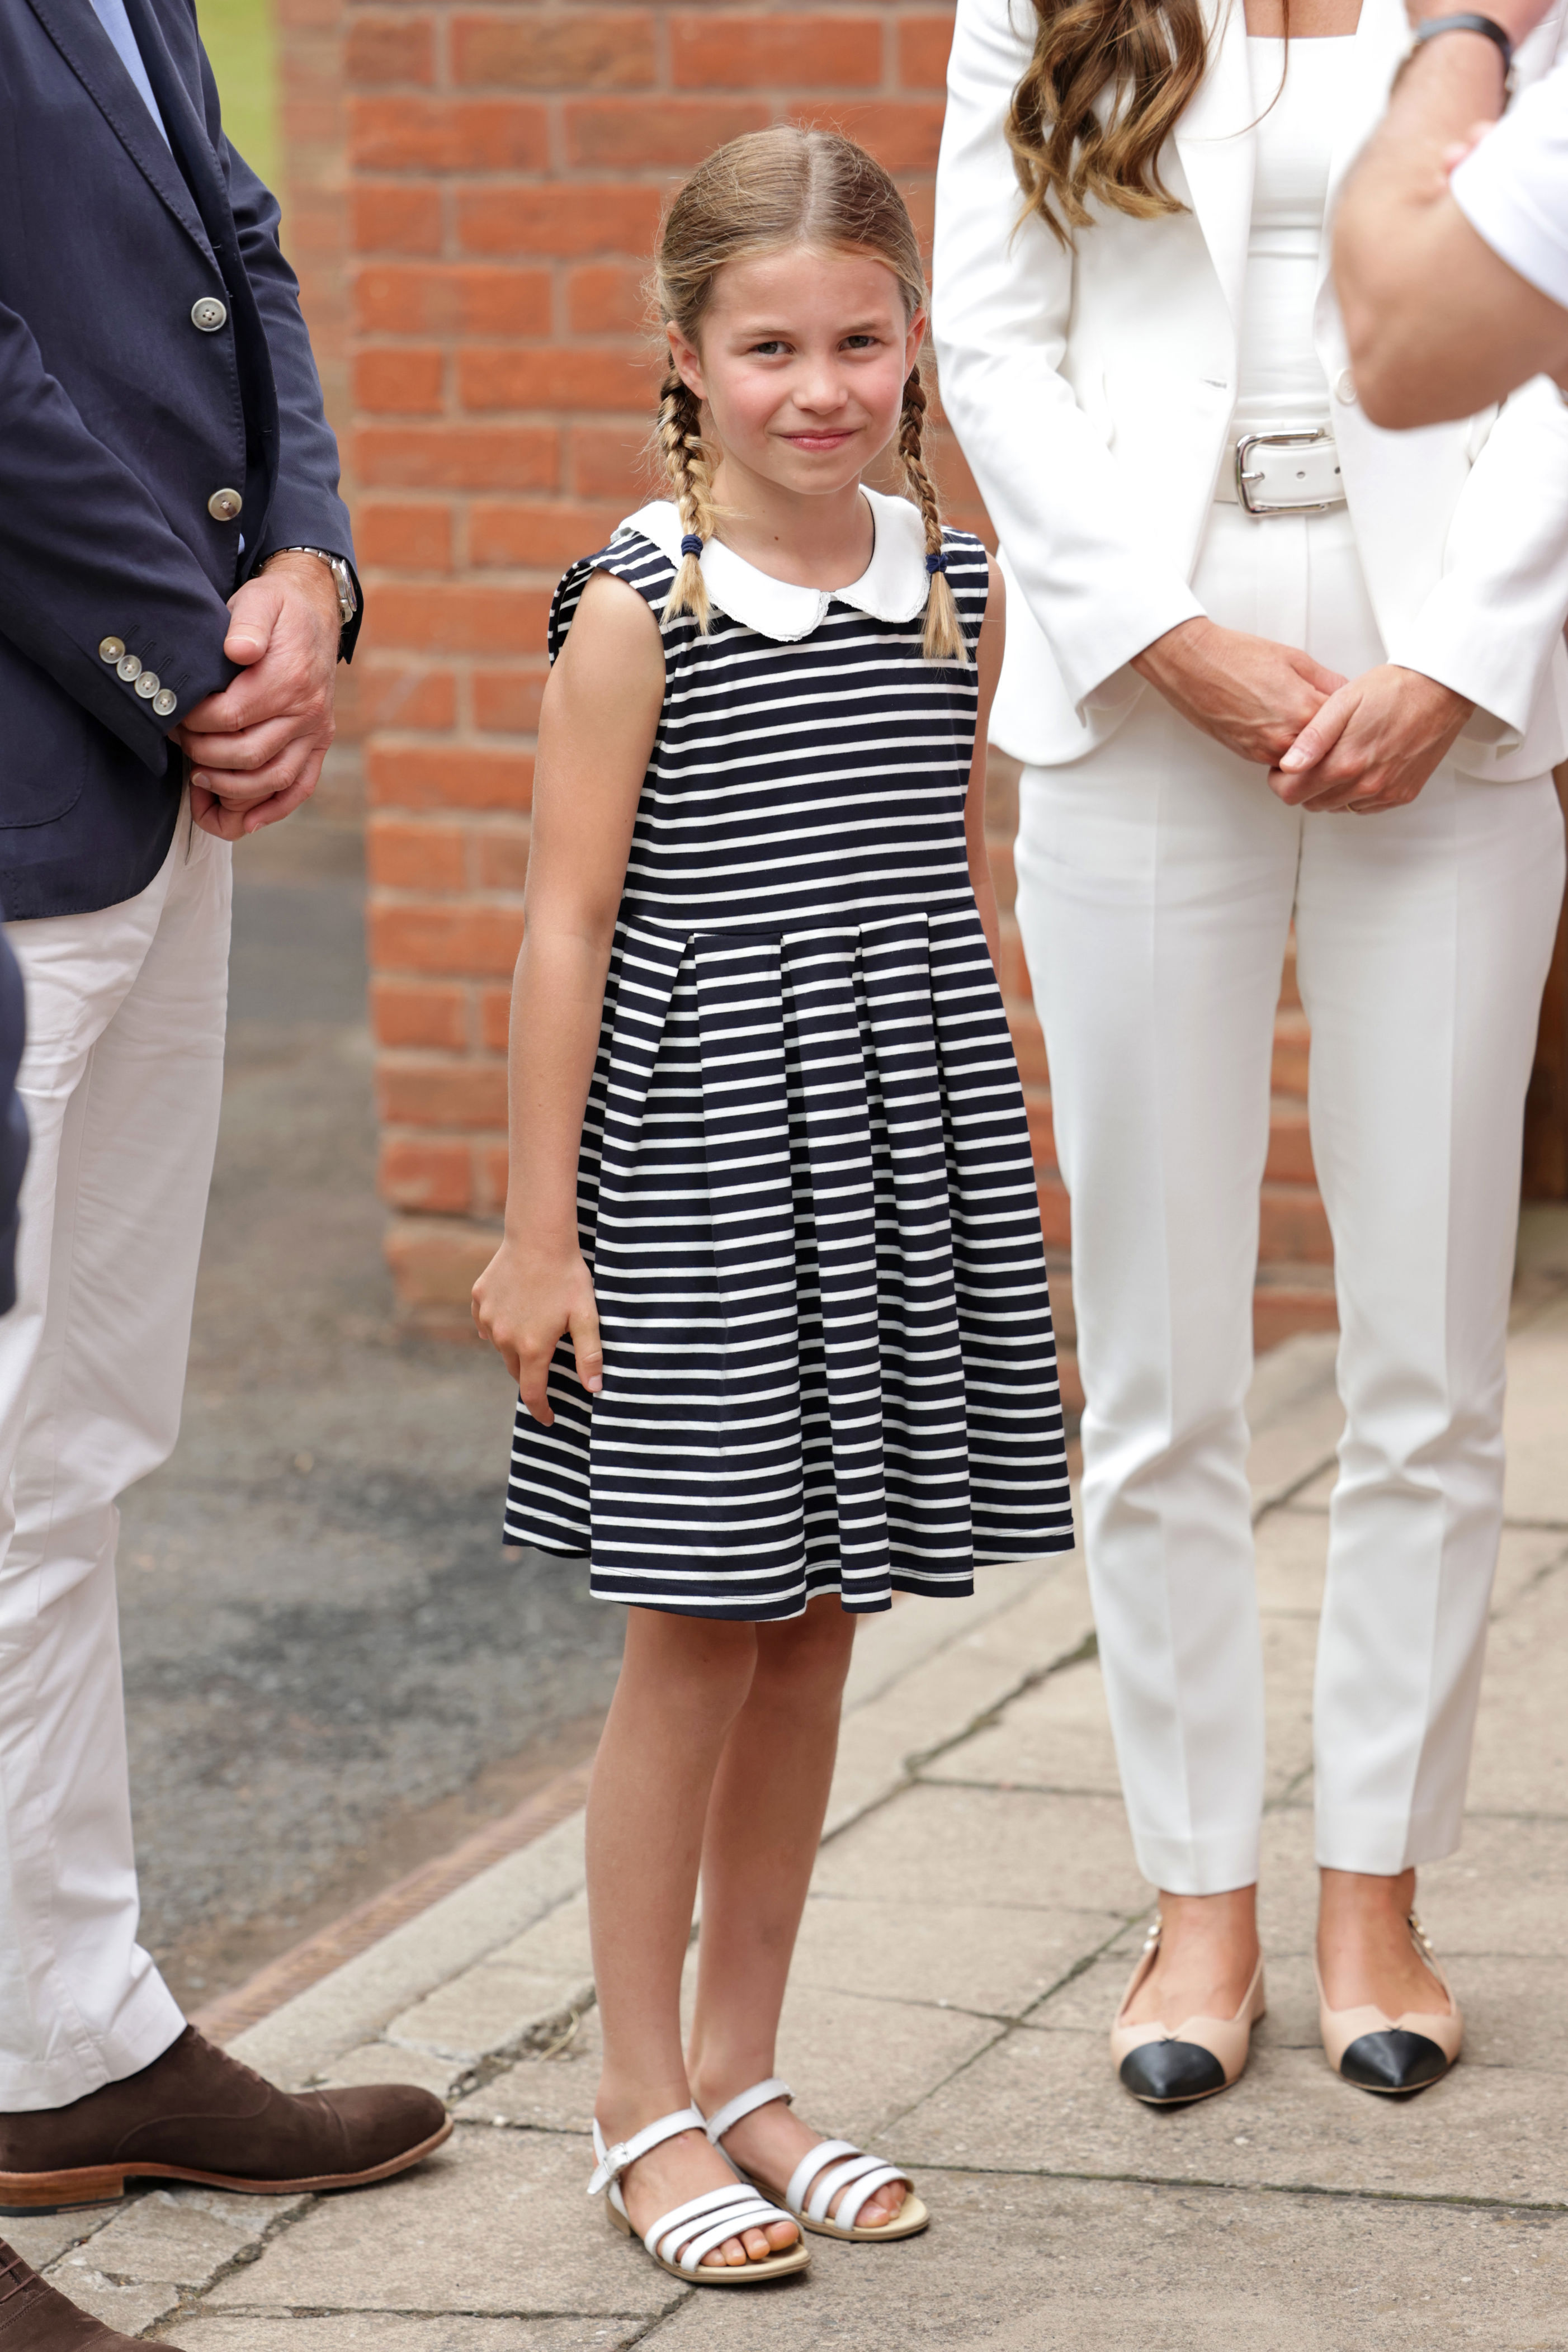 <p>Princess Charlotte wore white sandals and a striped summer dress with a Peter Pan collar as she joined her parents for a visit to the SportsAid House at the 2022 Commonwealth Games in Birmingham, England, on Aug. 2, 2022.</p>